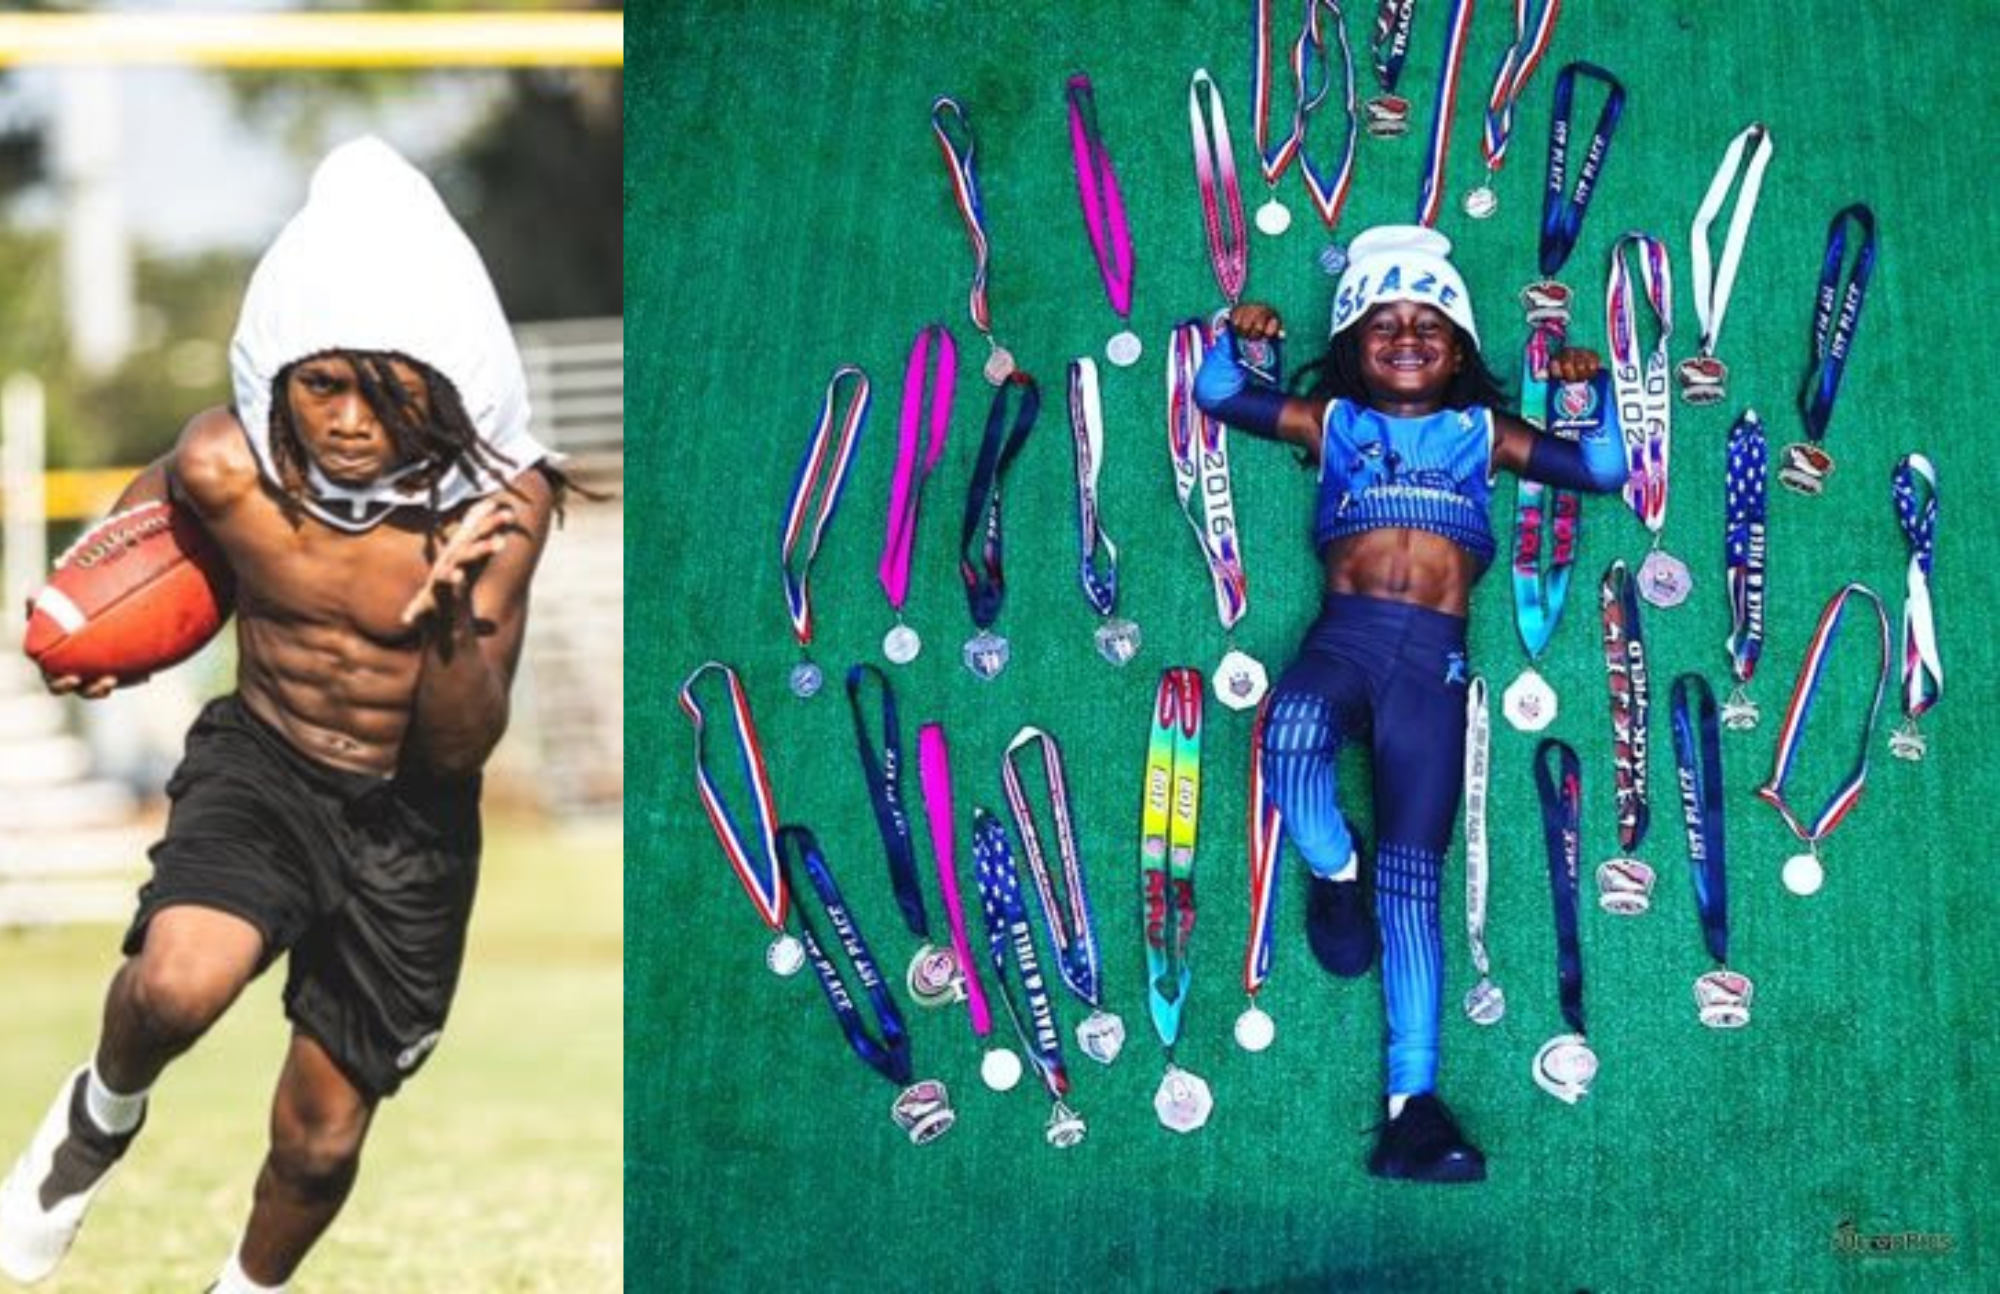 Fastest Kid In The World - An 11-Year-Old Rudolph Ingram Who Runs Like A Machine